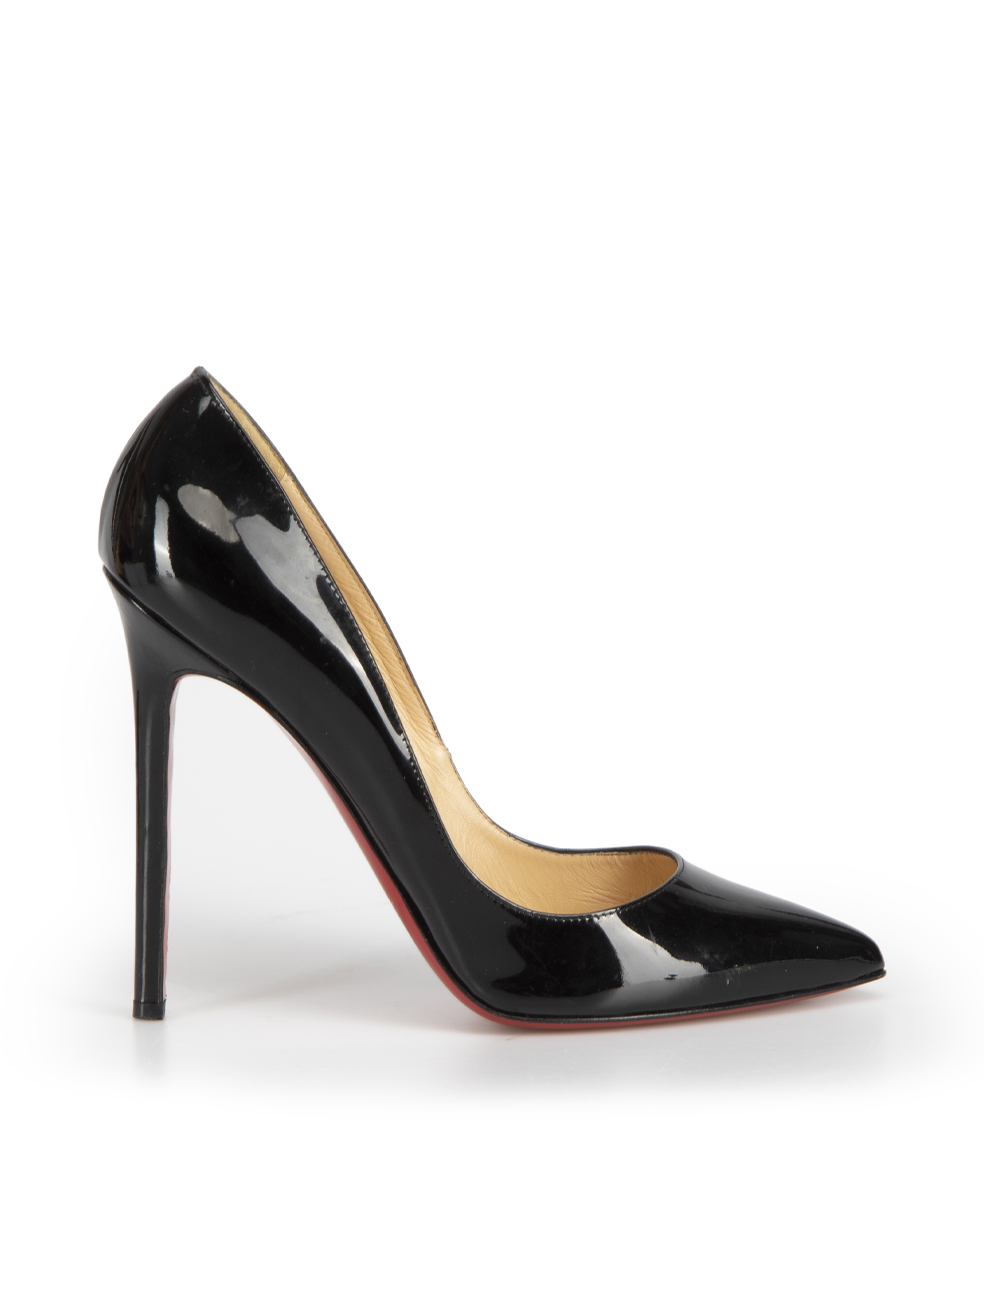 Christian Louboutin - Authenticated Heel - Suede Black Plain for Women, Good Condition